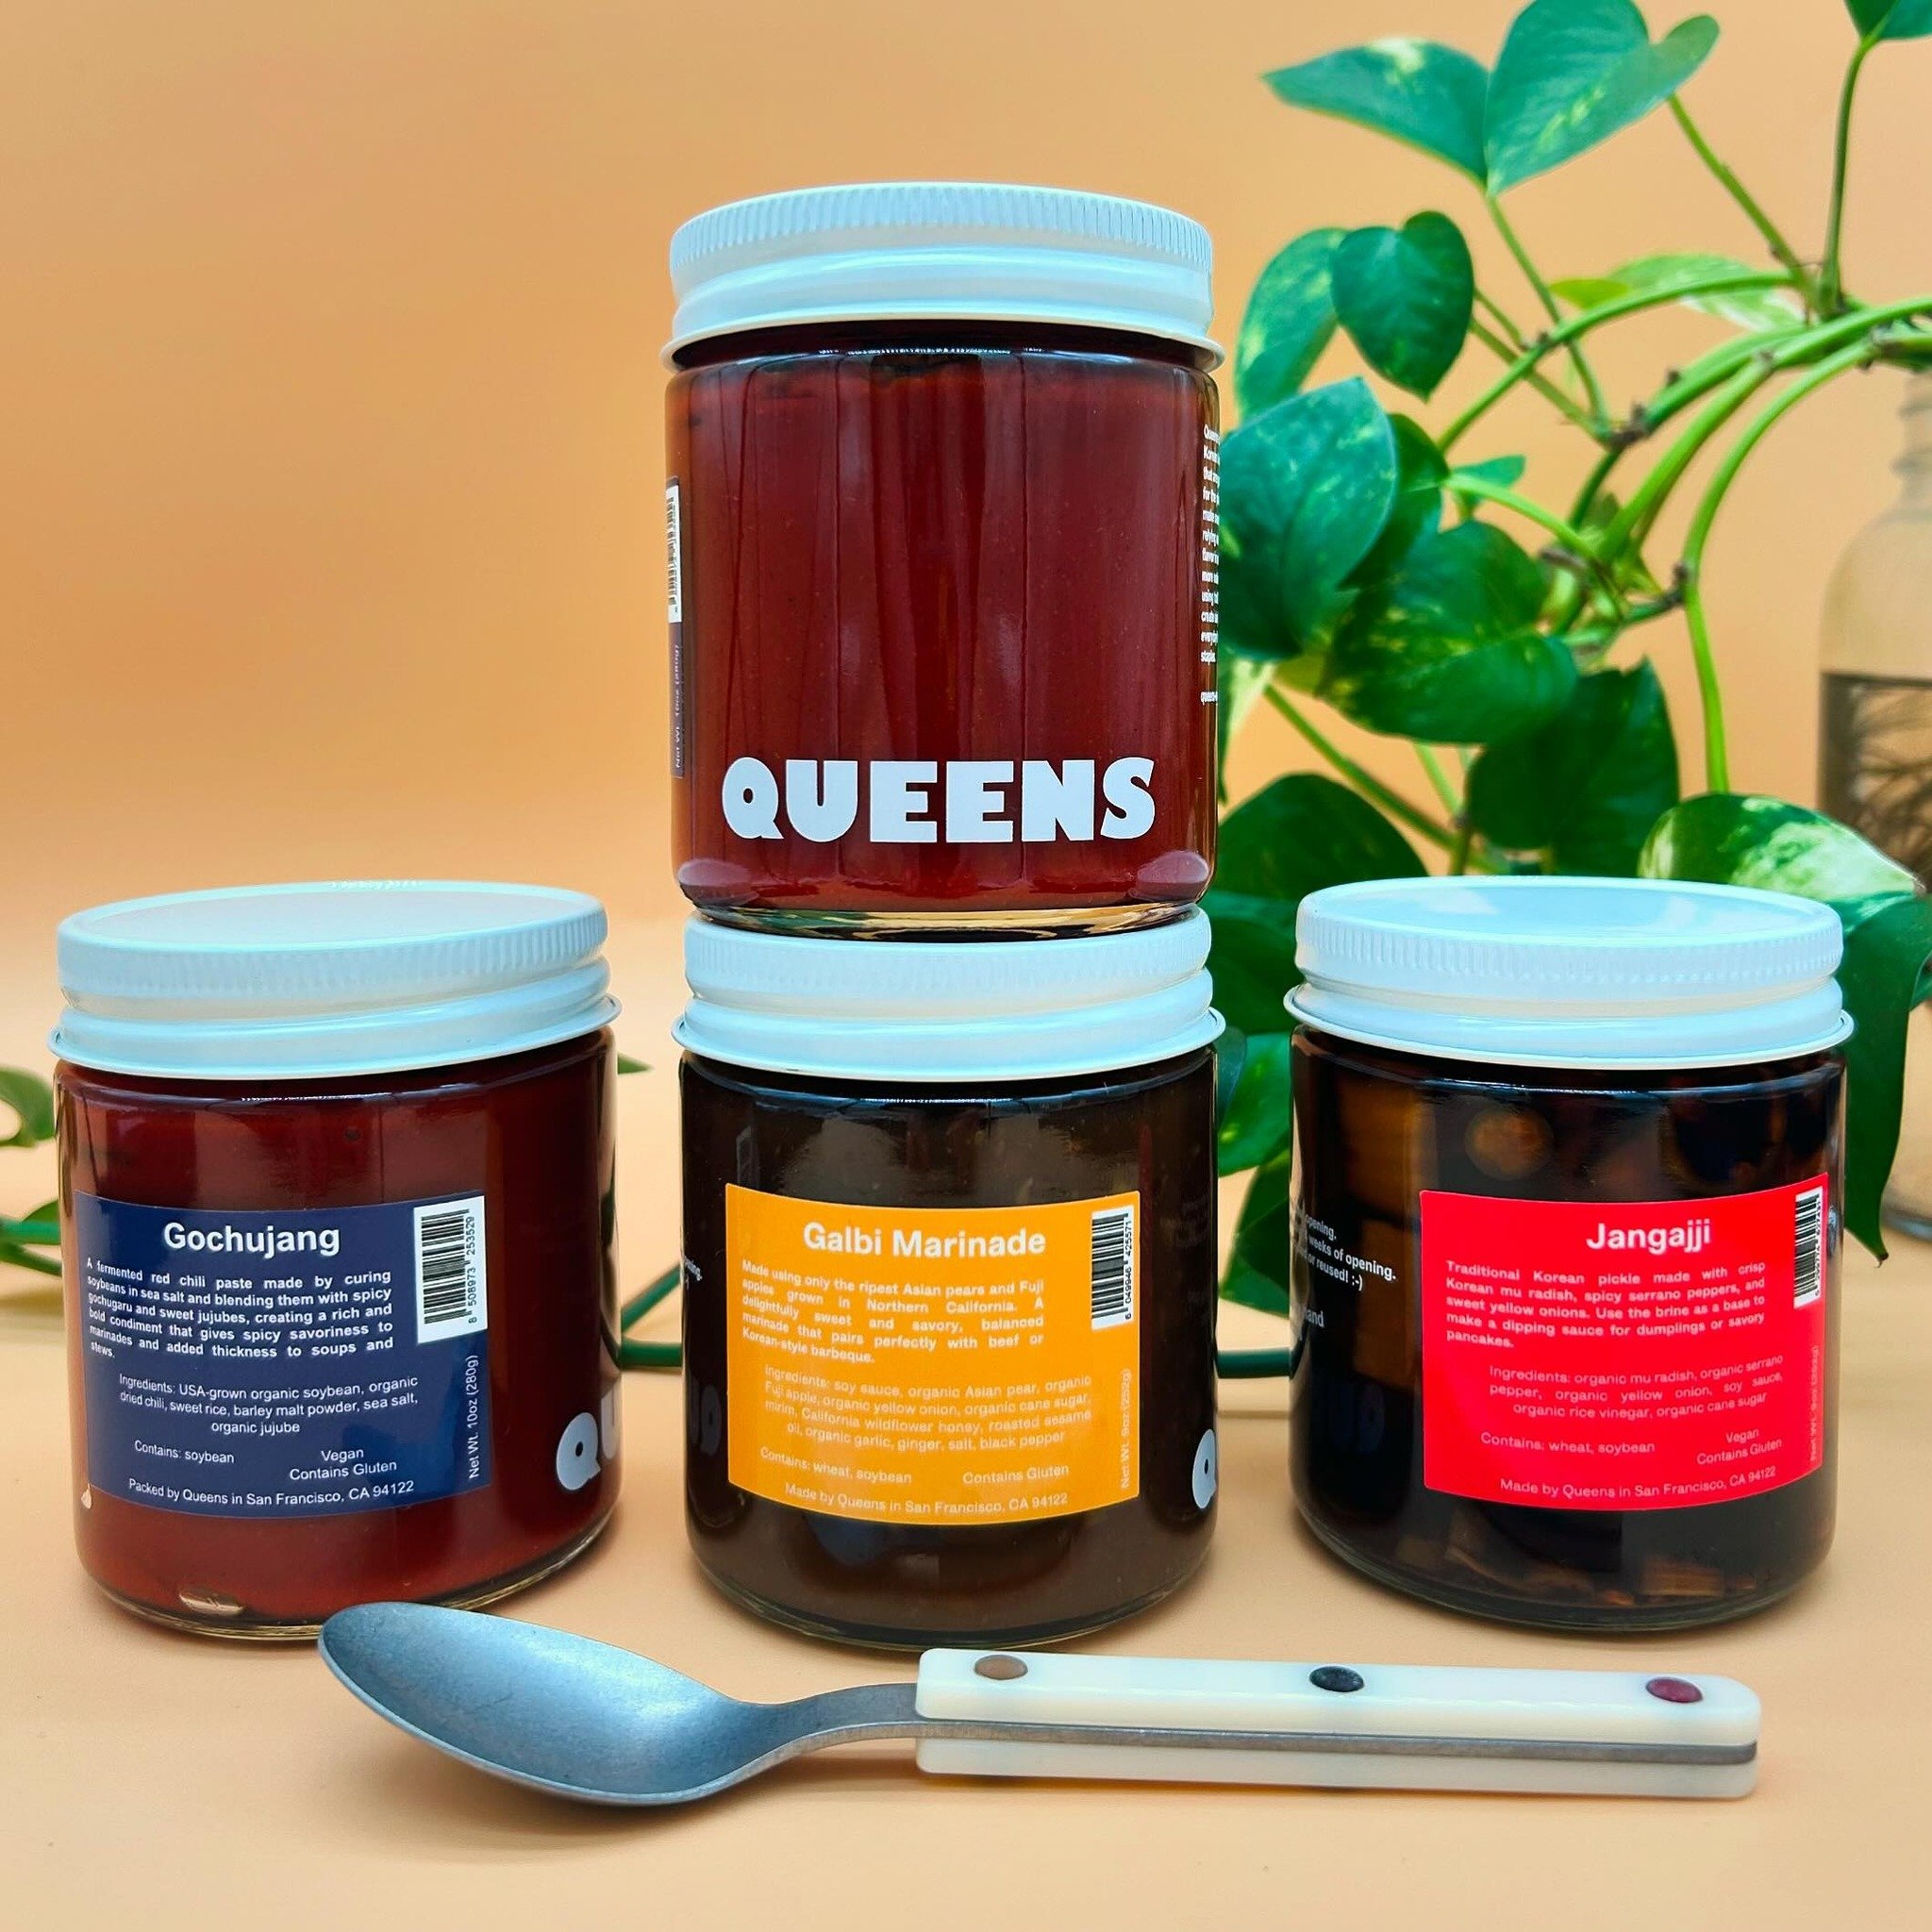 Introducing @queens__universe! 

We&rsquo;re stoked to NOW carry a selection of our favorite Queens pantry items including the following:

🏆 Gochujang: Jujube infused fermented red chili paste. Hand harvested and fermented in Apple Valley, Californi